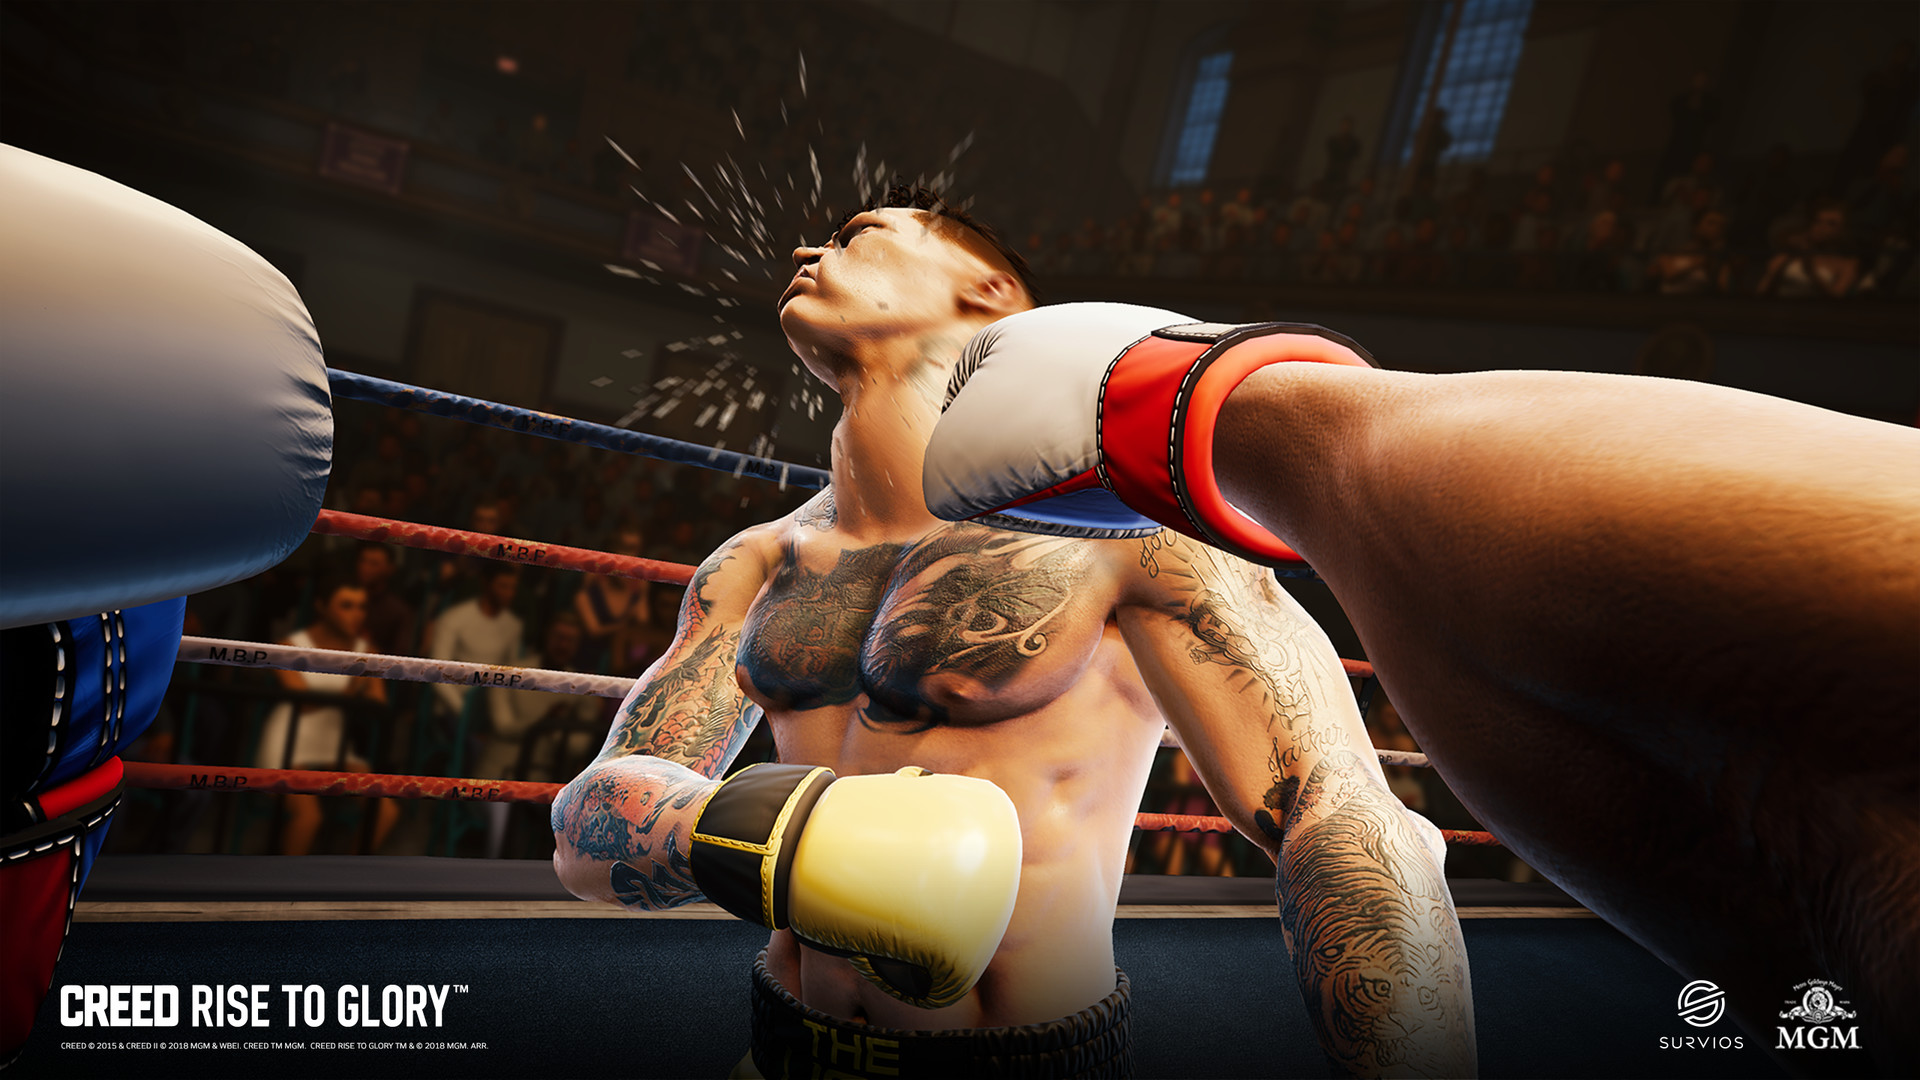 Бокс пс игры. Creed VR ps4. Creed Rise to Glory. Creed Rise to Glory VR. Бокс Крид VR.